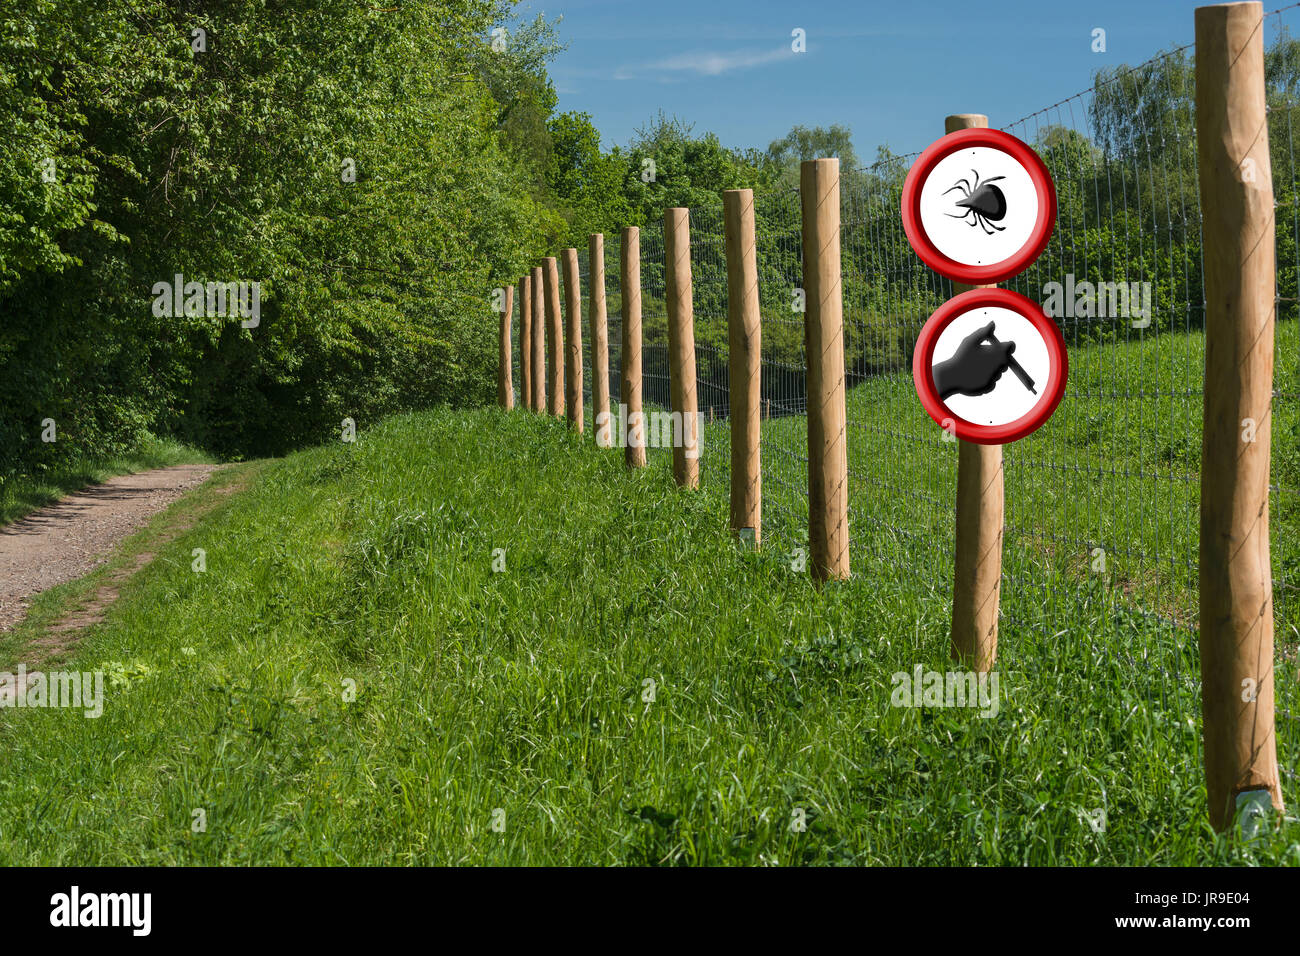 Borreliosis and tick warning. Two round red warning signs on a fence post in front of a green meadow. A sign with ticks symbol the other shows a hand  Stock Photo